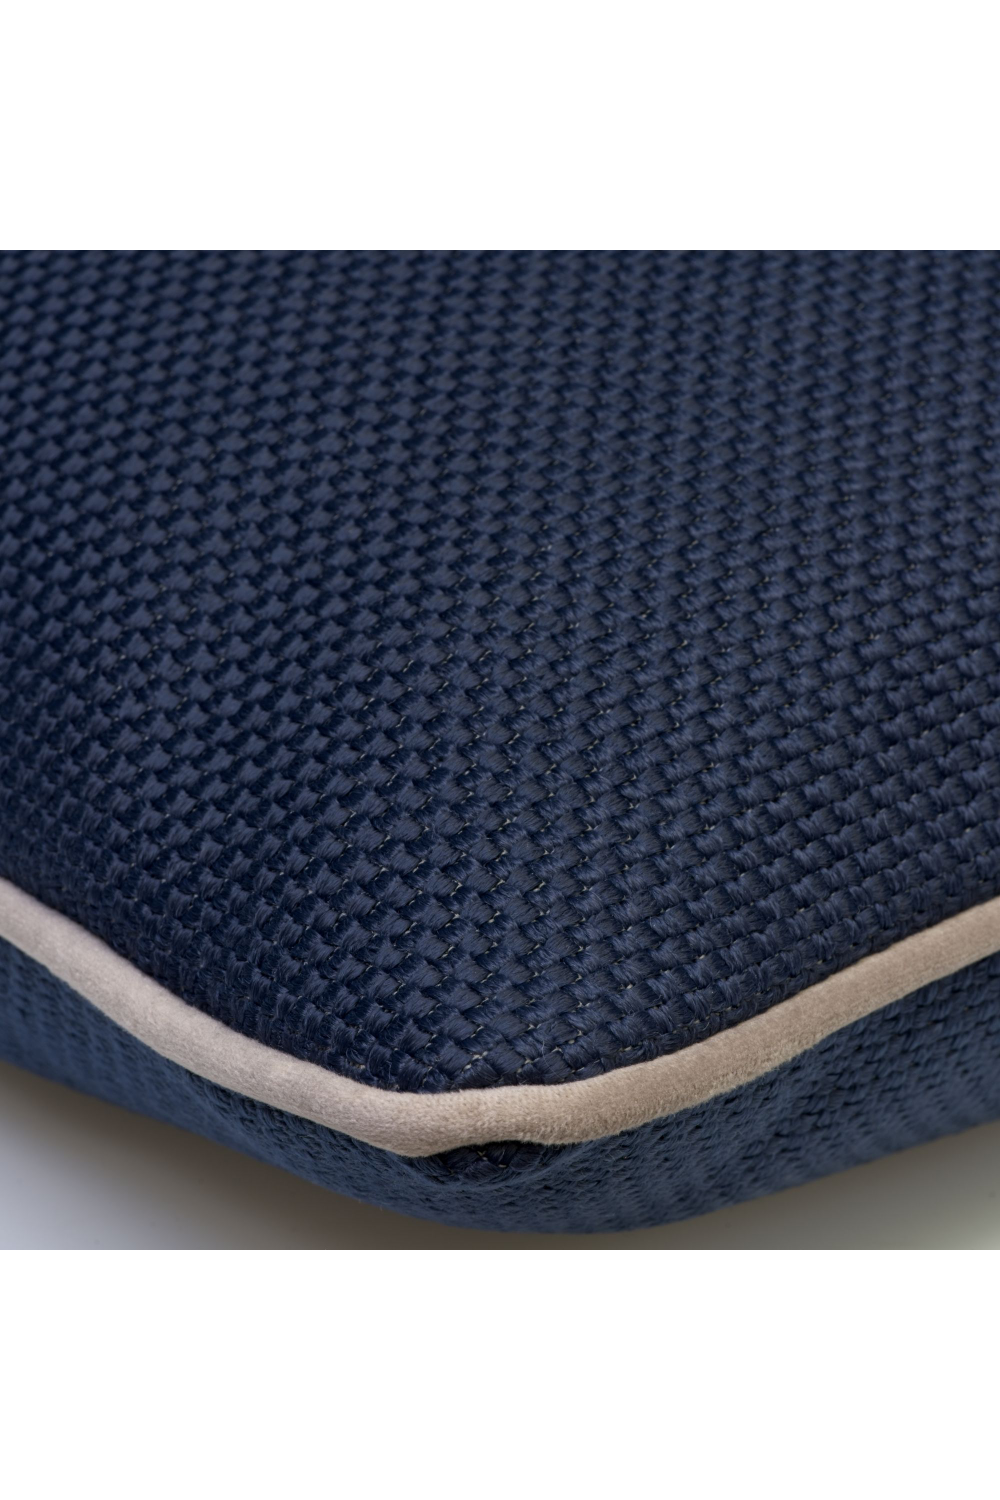 Weave Outdoor Cushion With Piping | Andrew Martin Taglioni | Oroa.com